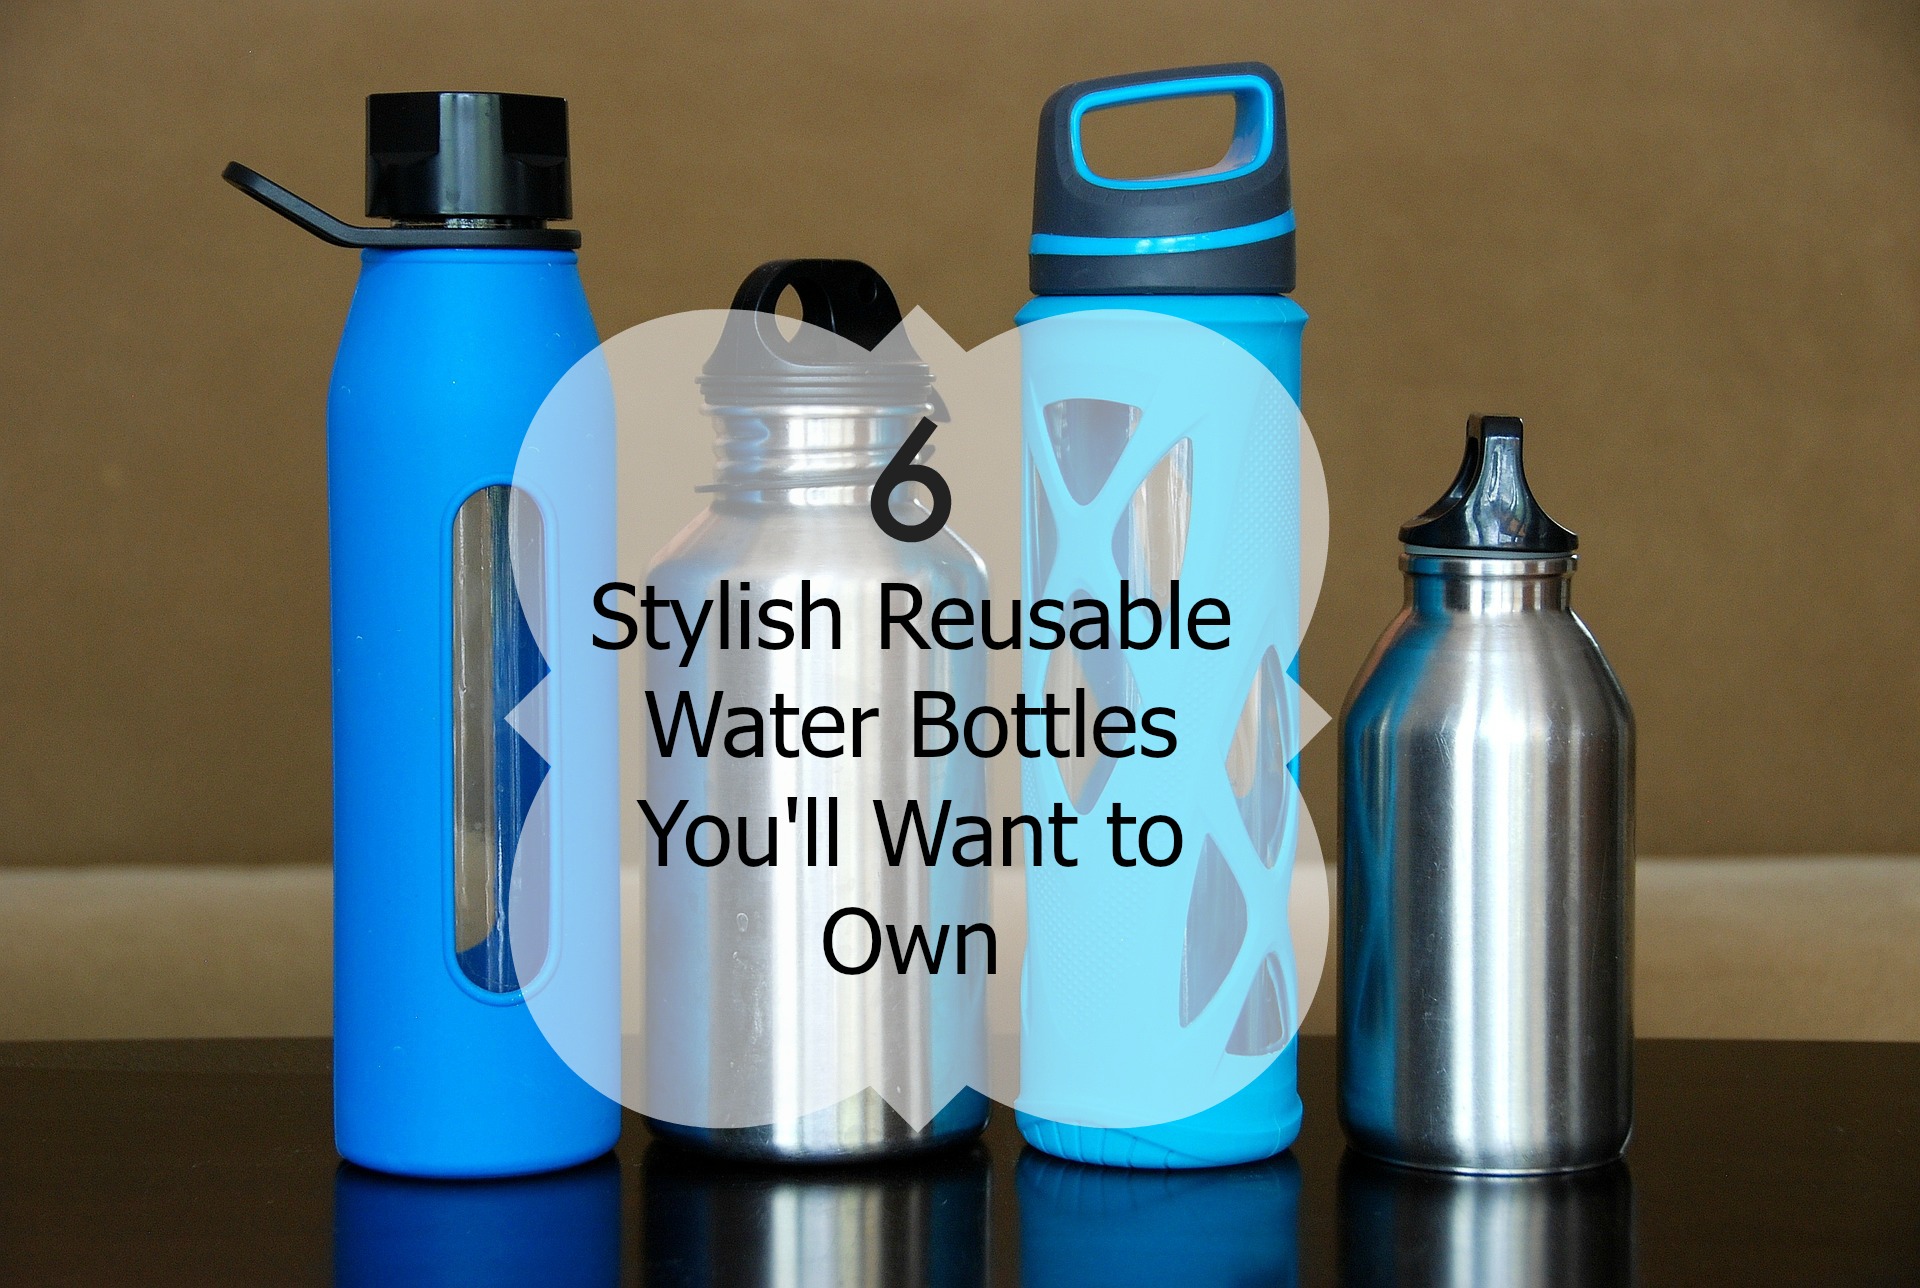 6 Stylish Reusable Water Bottles You’ll Want to Own